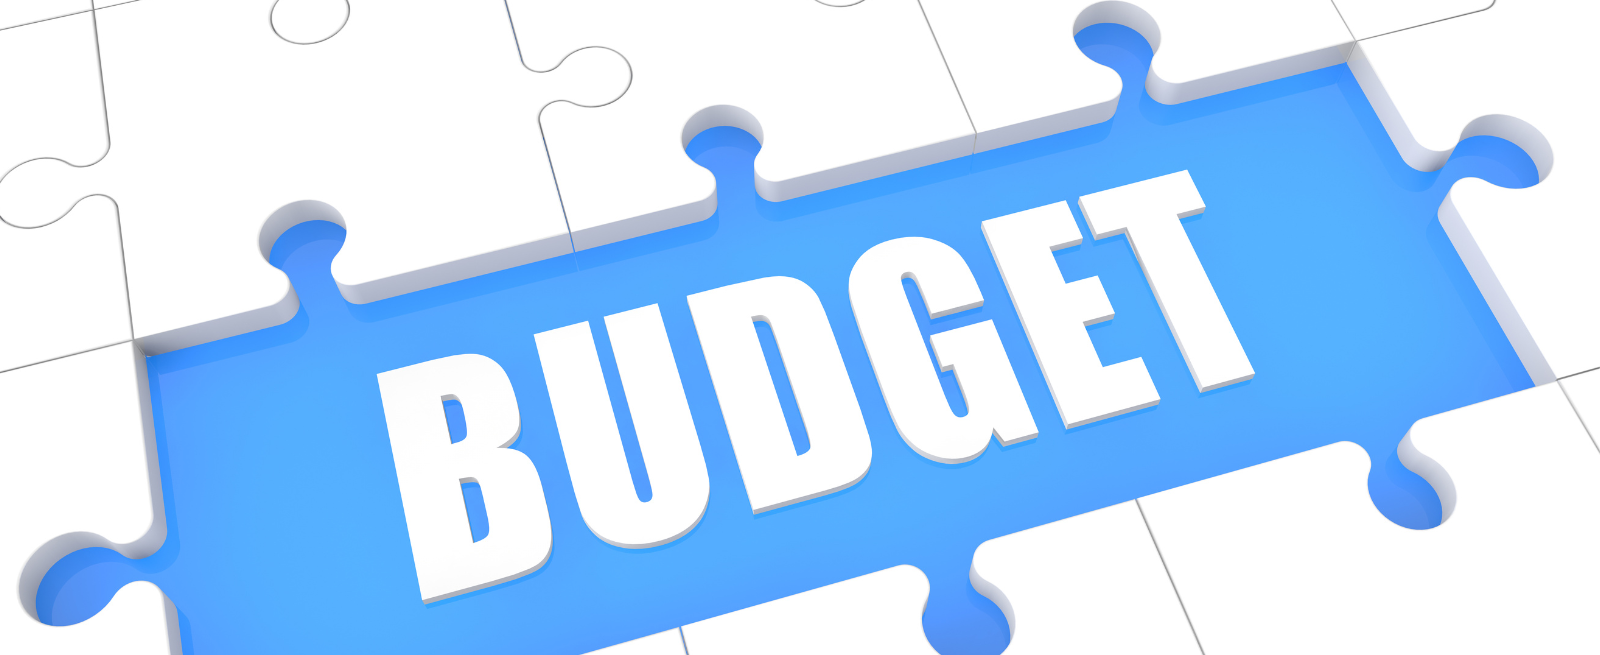 Word budget in a banner photo